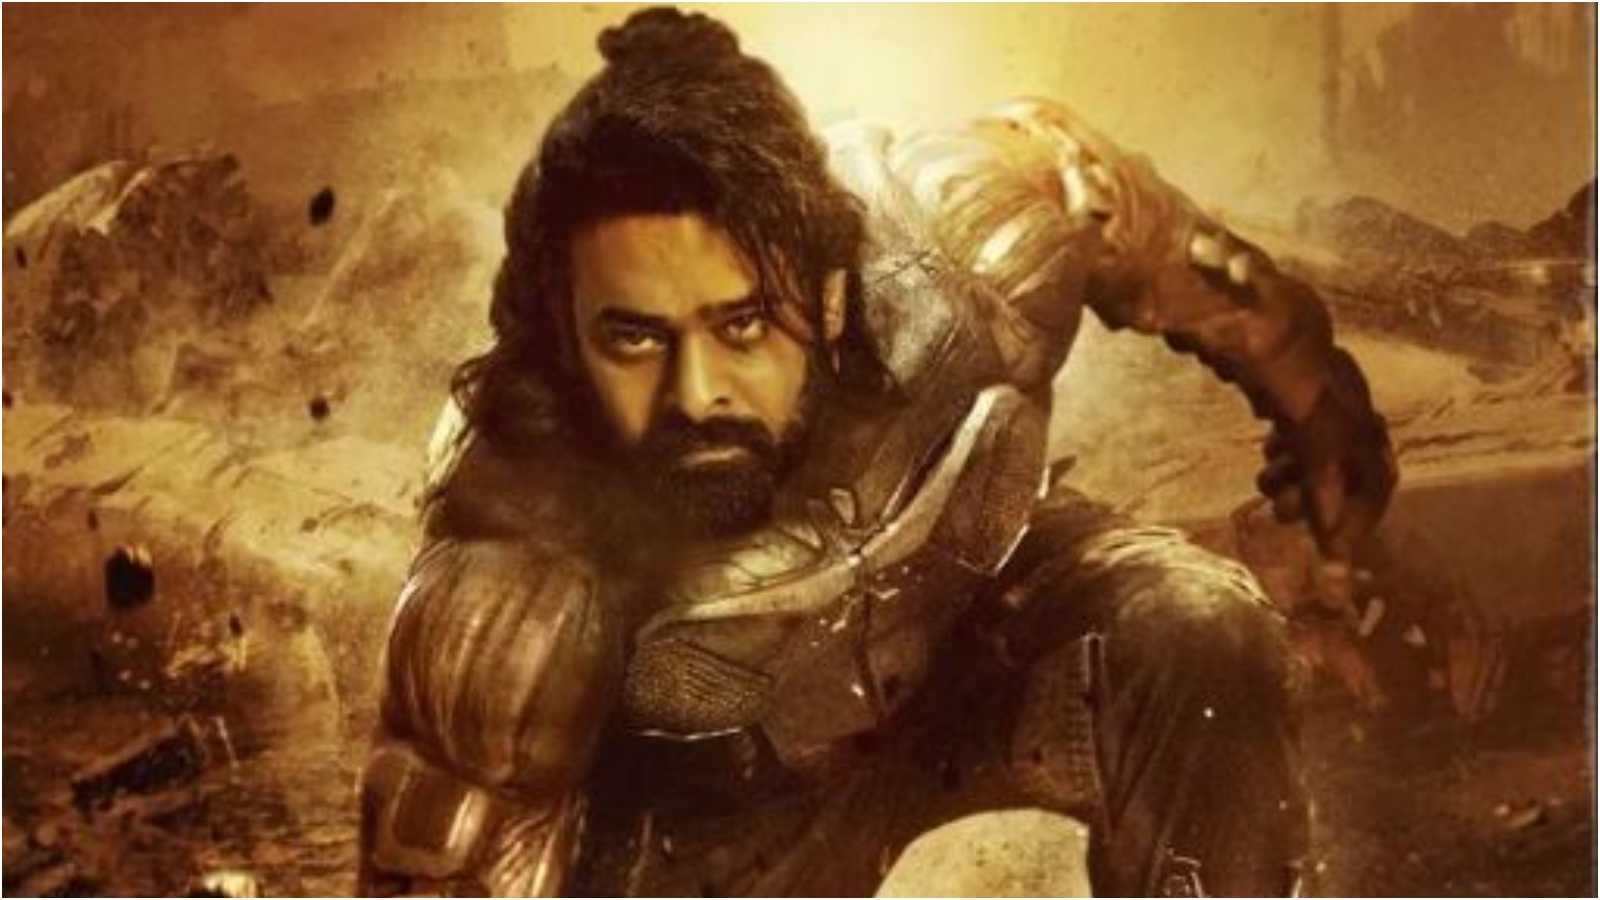 'Ek aur Adipurush': Prabhas shares his first look from Project K; poster leaves netizens disappointed